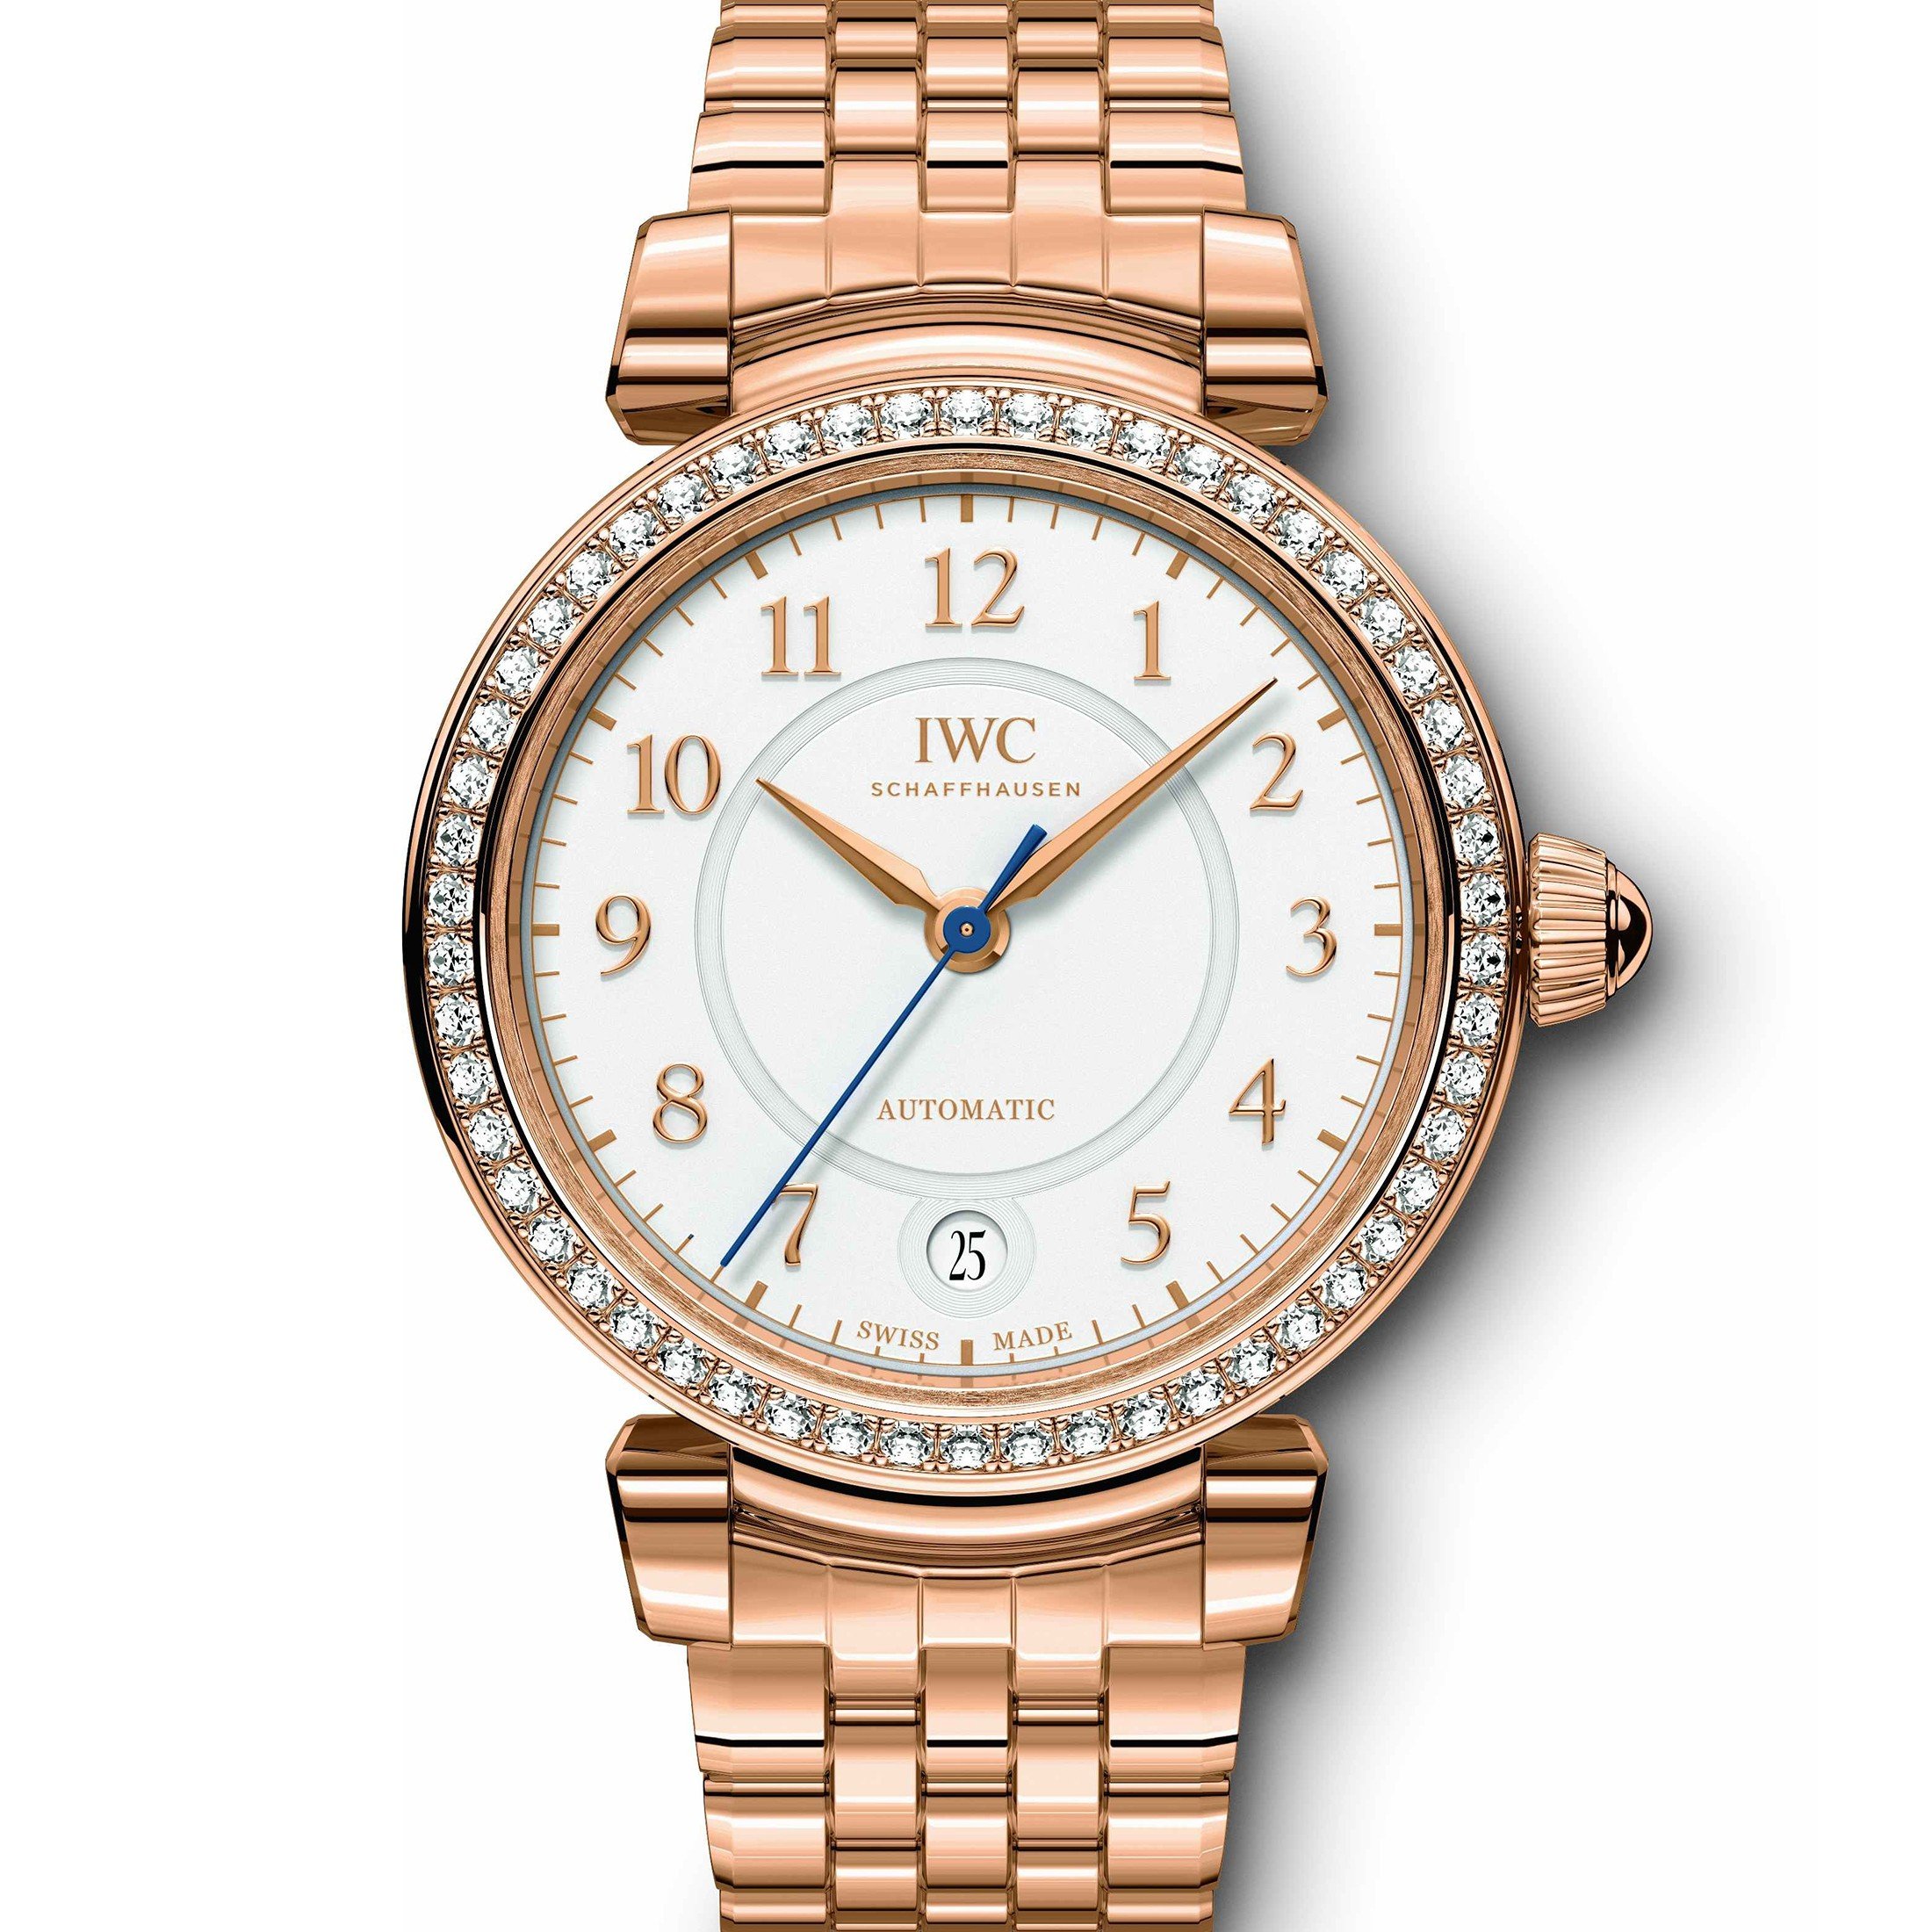 Da Vinci 36mm Automatic in Rose Gold with Diamond Bezel on Rose Gold Bracelet with Silver Dial